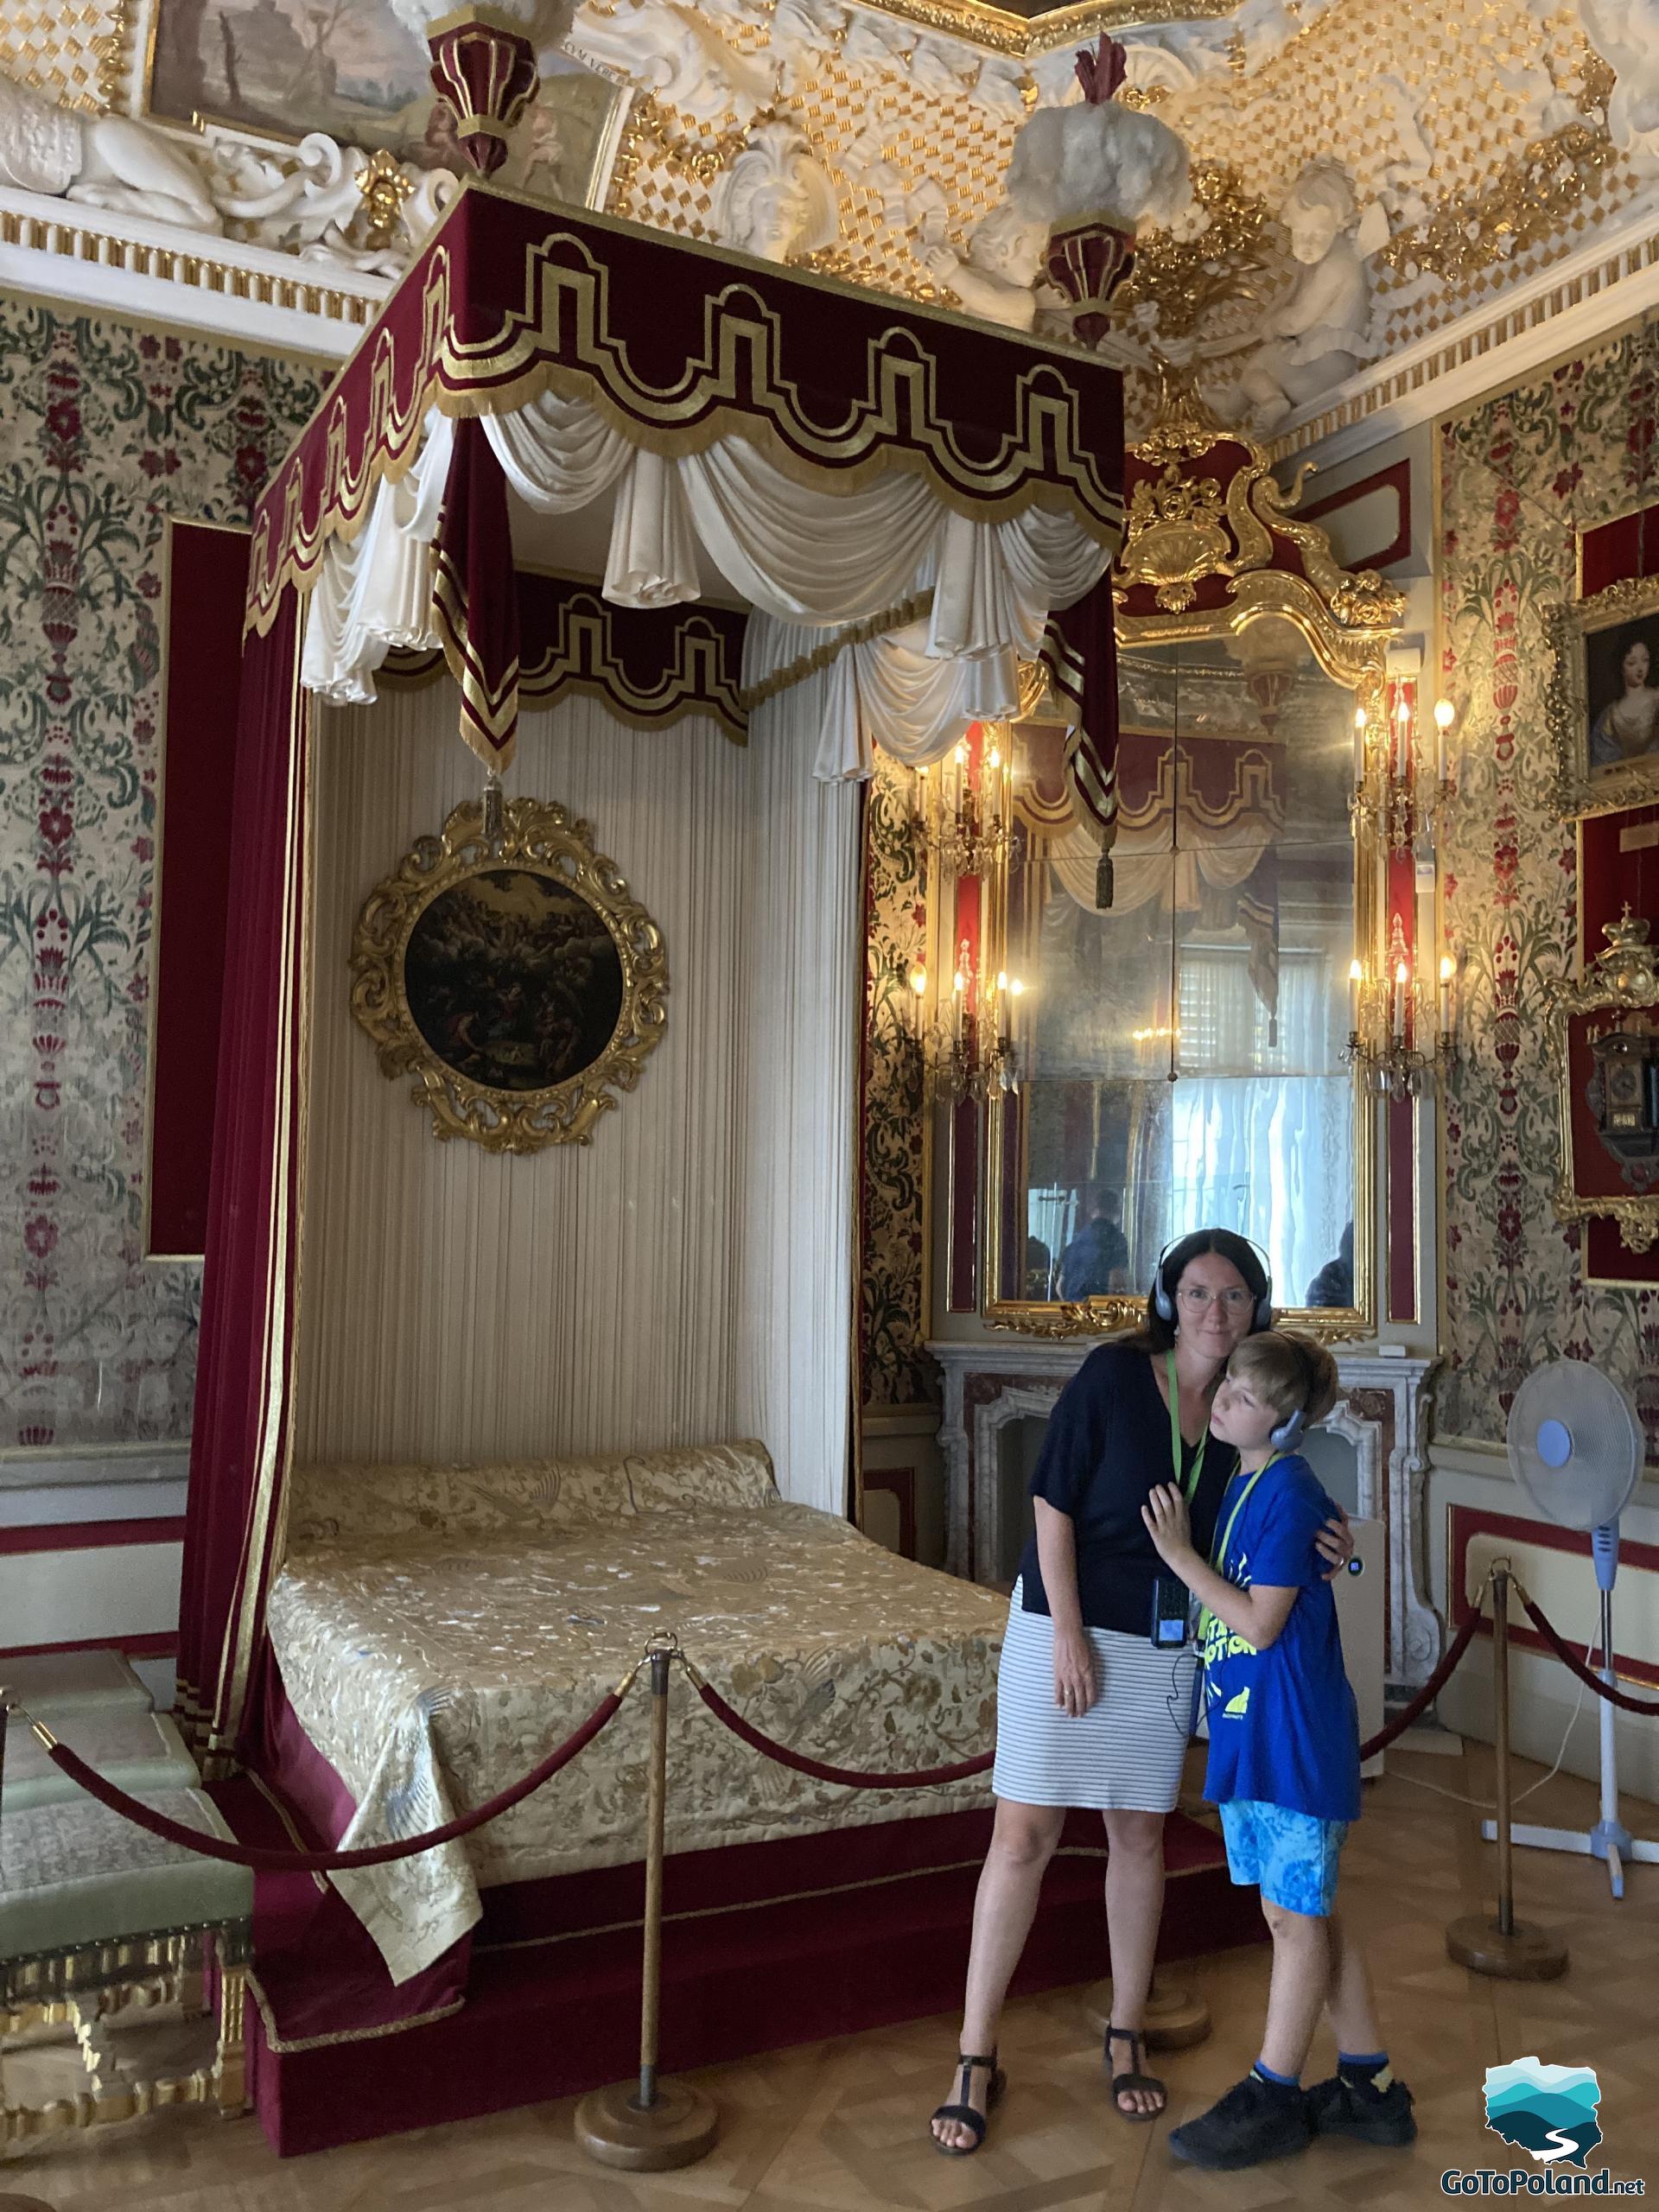 a very decorative bedroom in a palace with a large bed, paintings on the walls, sculptures by the ceiling, a woman with a boy standing next to the bed